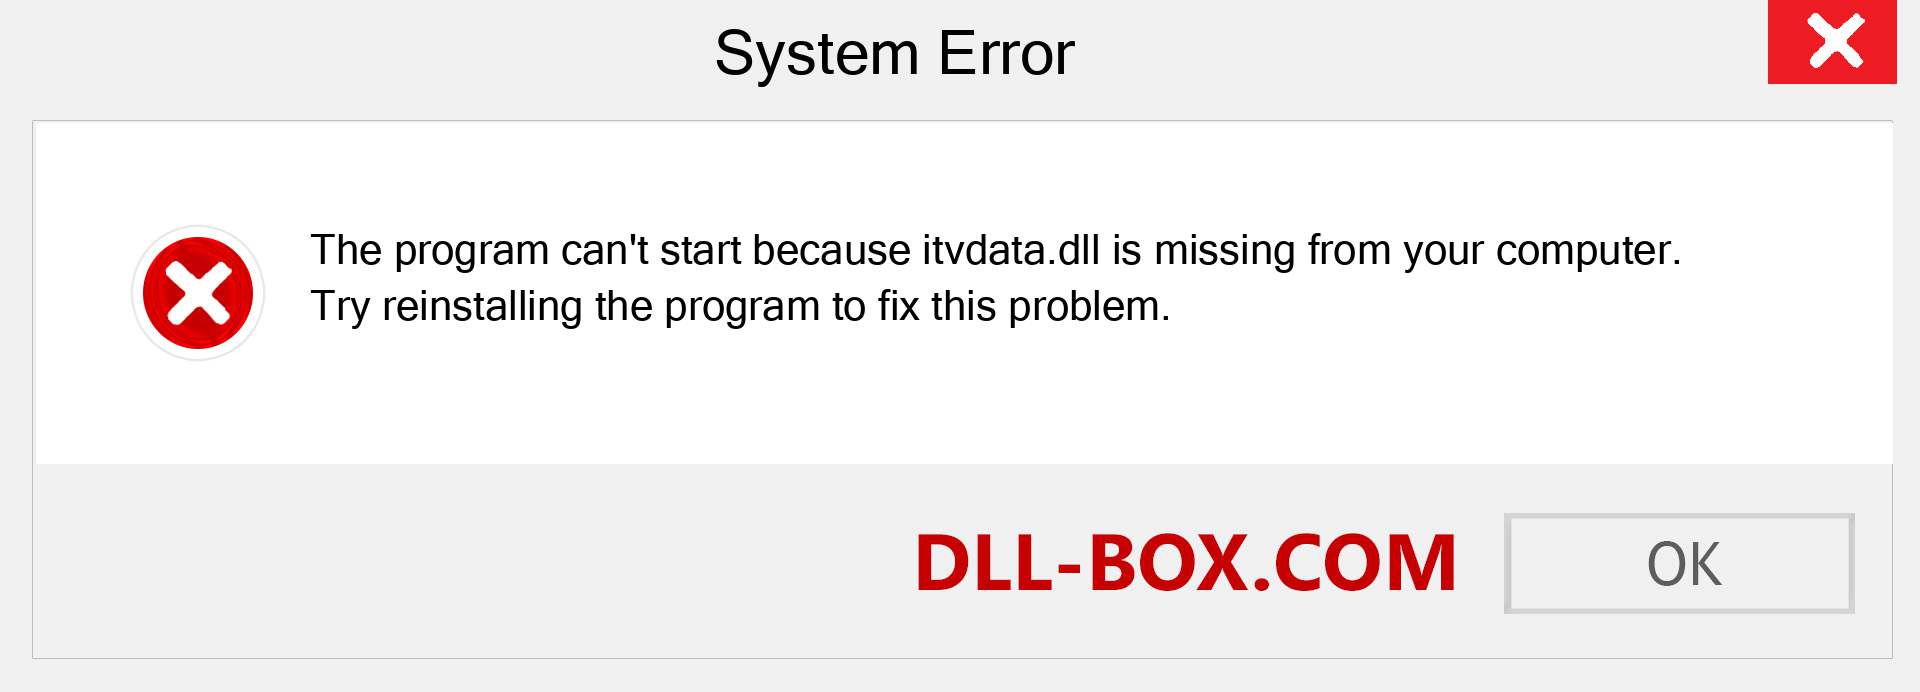  itvdata.dll file is missing?. Download for Windows 7, 8, 10 - Fix  itvdata dll Missing Error on Windows, photos, images